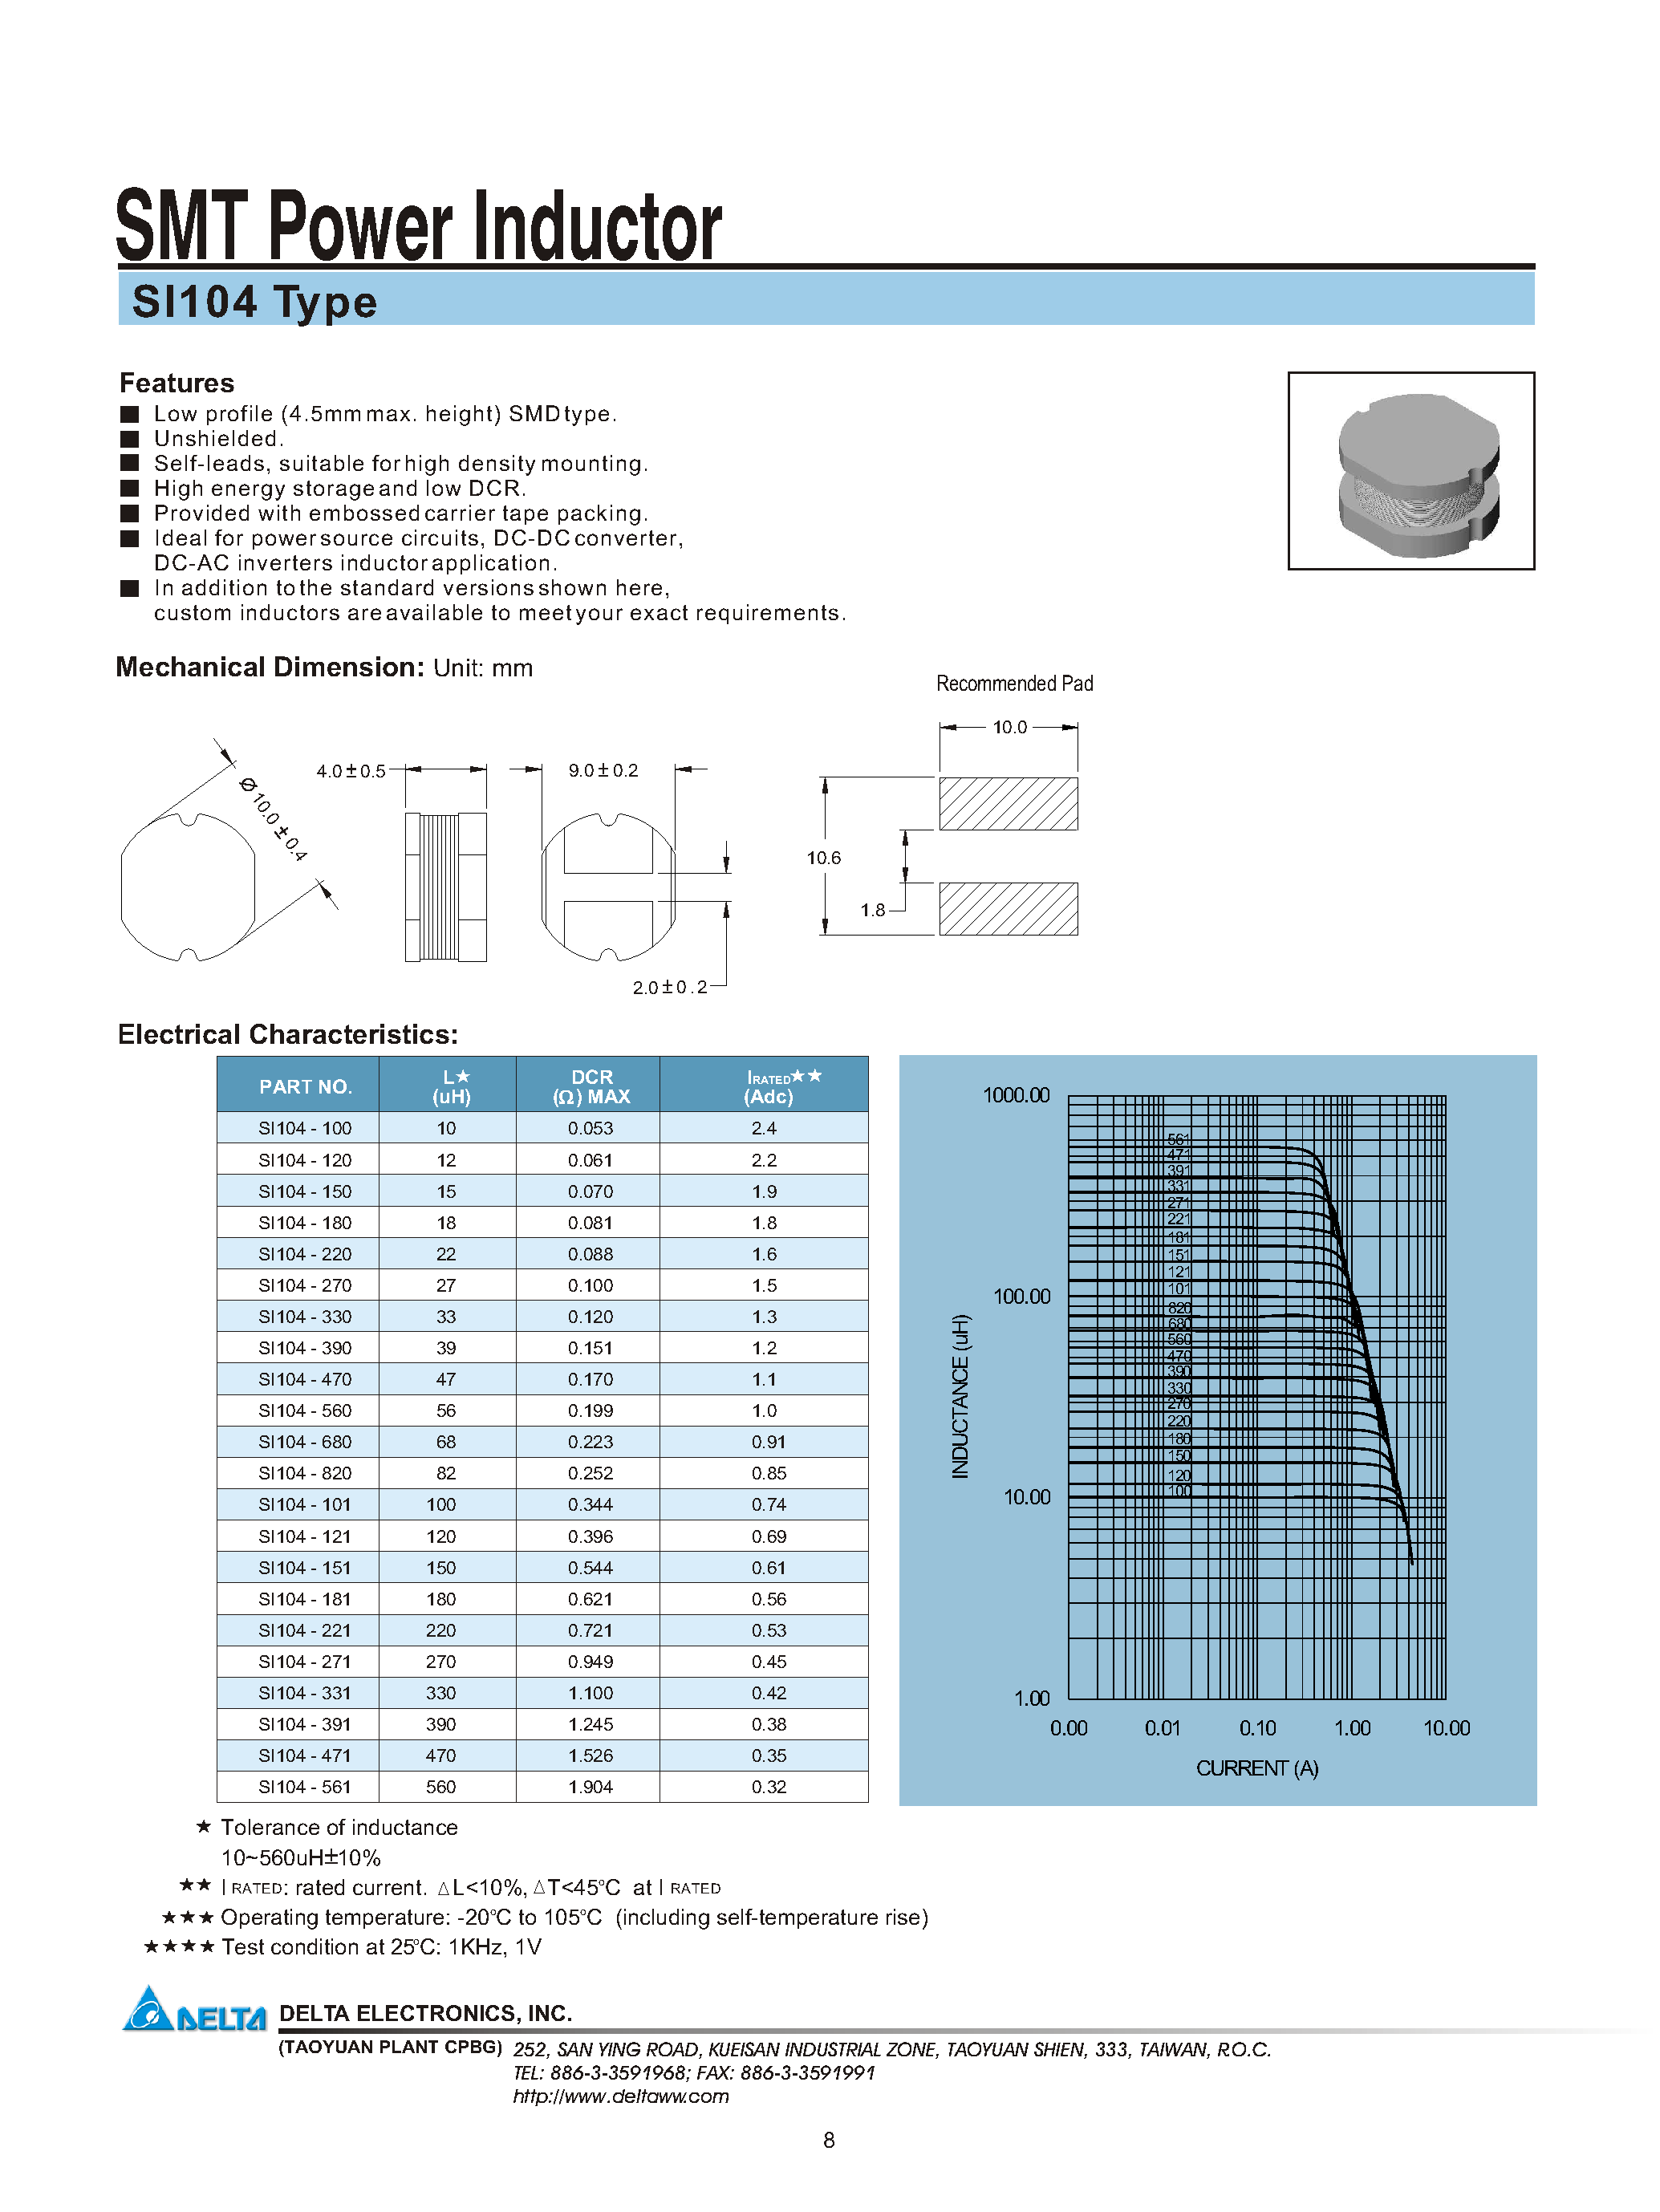 Datasheet SI104-221 - SMT Power Inductor page 1